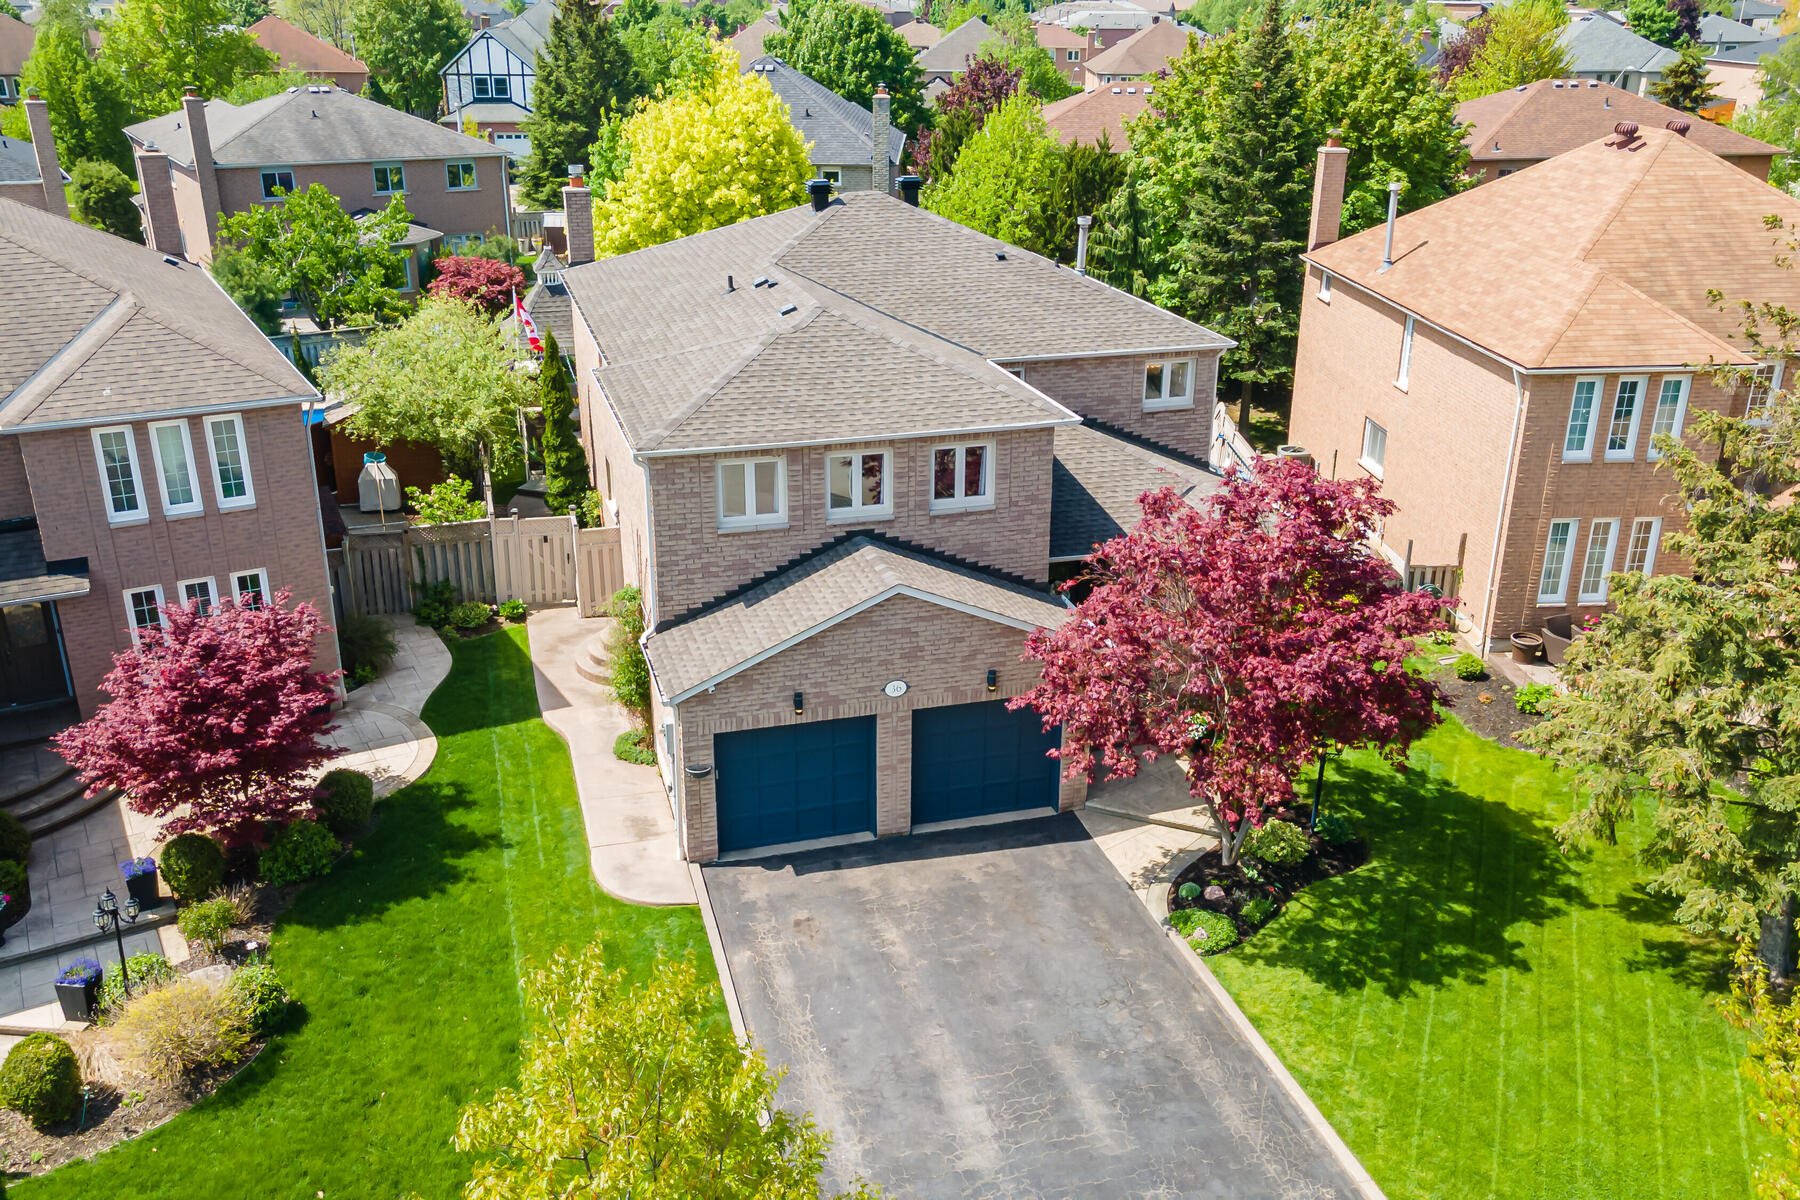 36 Treanor Cres Georgetown ON L7G 5H9 Canada-083-171-Aerial-MLS_Size.jpg